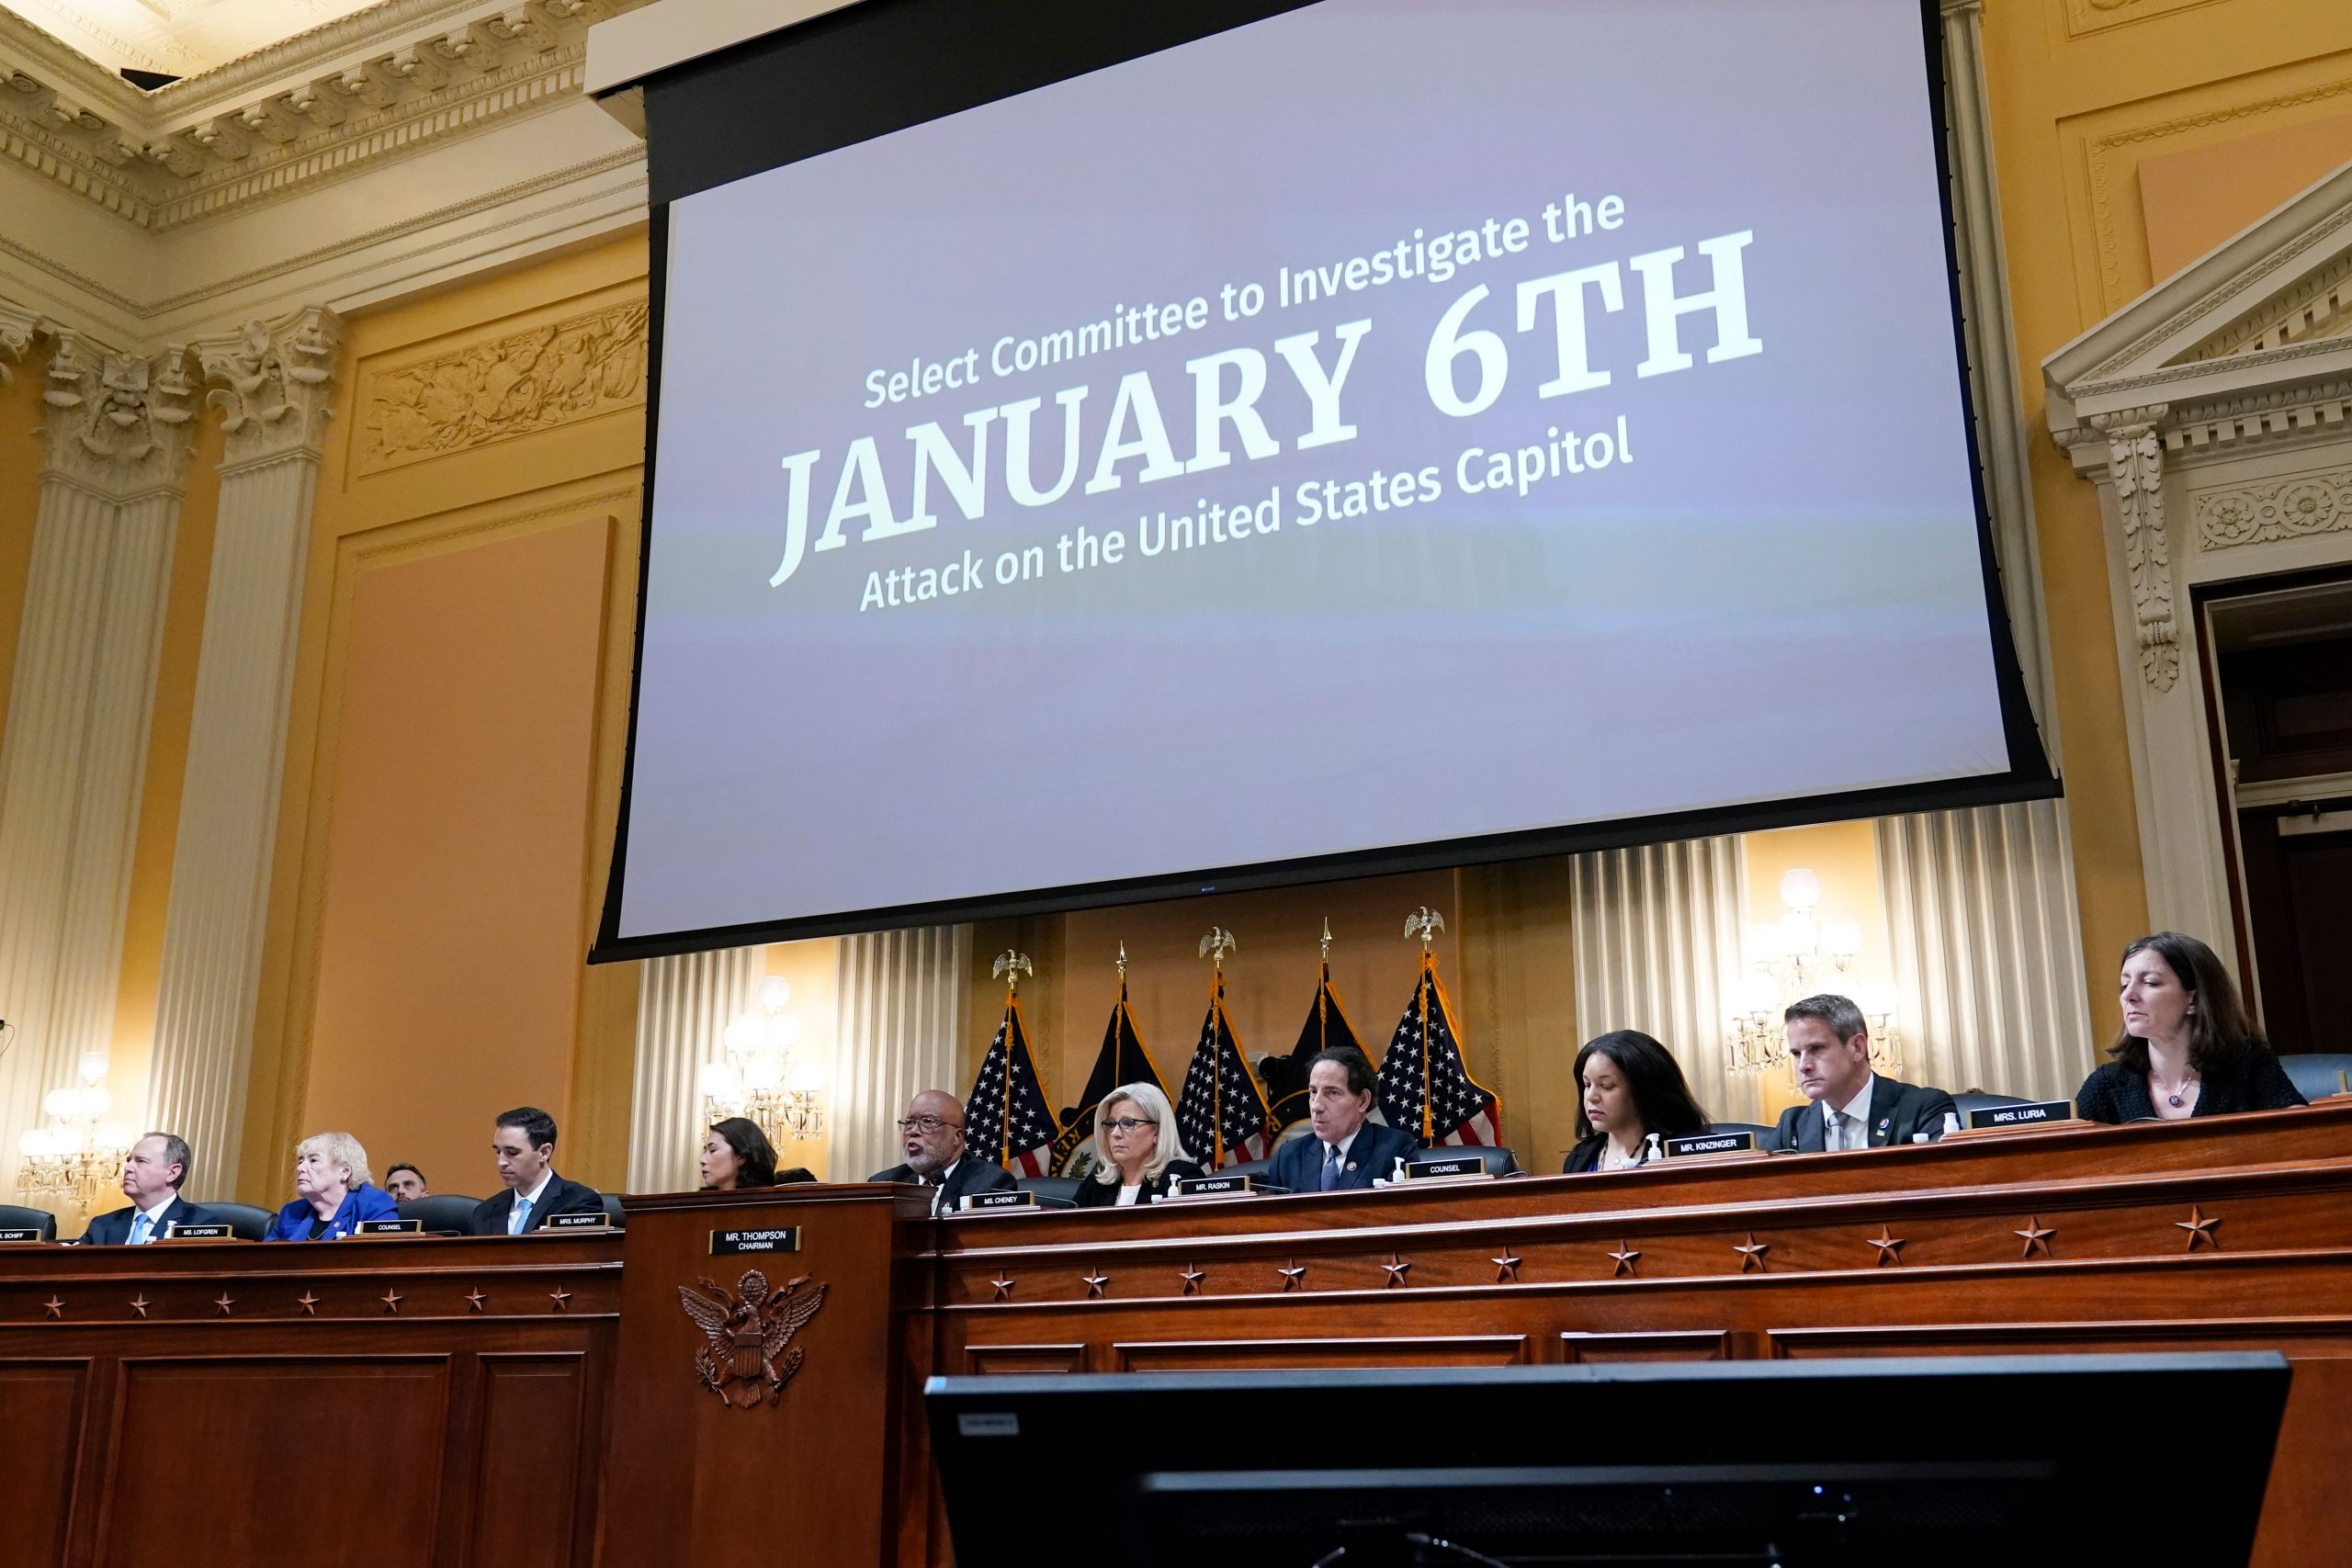 Jan 6 hearings: When and where to watch the second prime time session